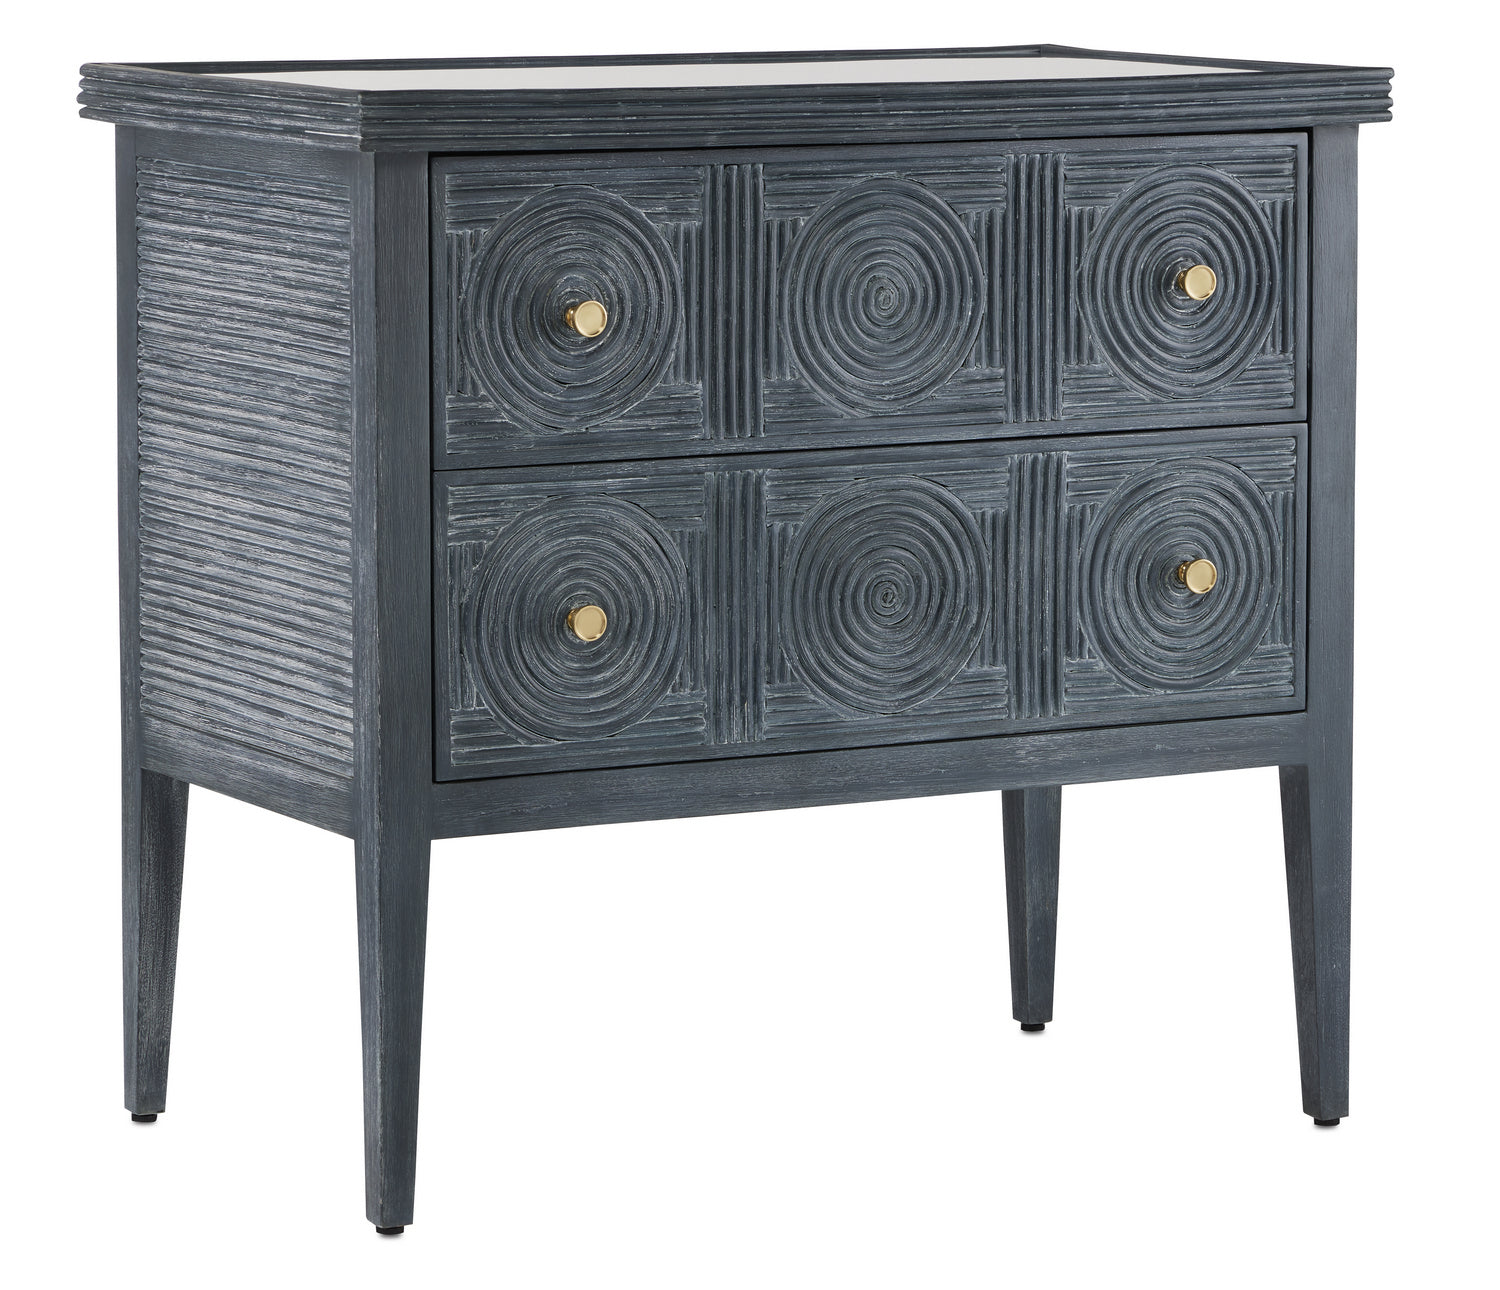 Chest from the Santos collection in Vintage Navy/Brushed Brass/Clear finish